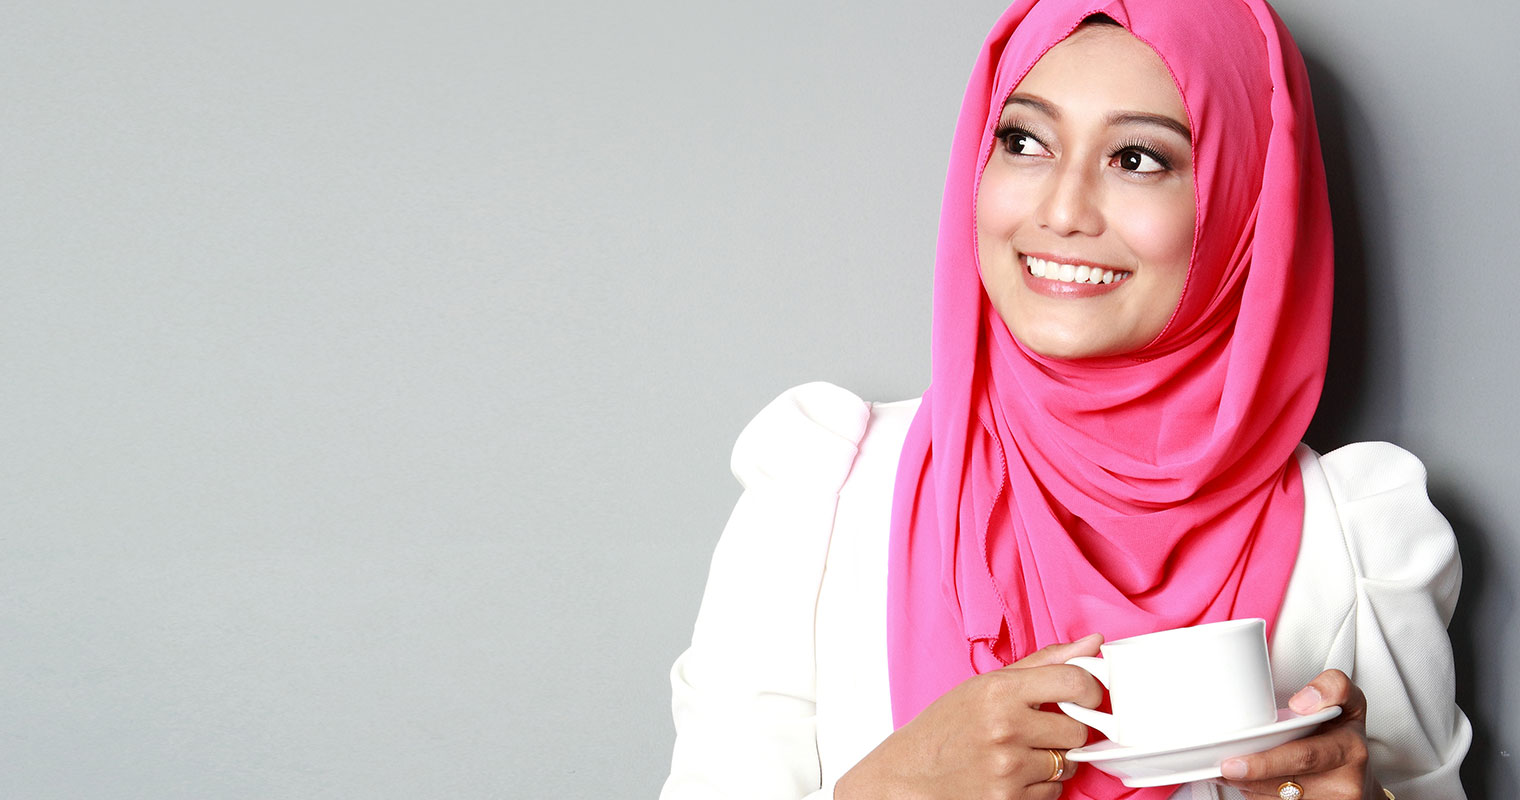 Halal skincare products lets one feel beautiful, and at the same time follow her Muslim faith